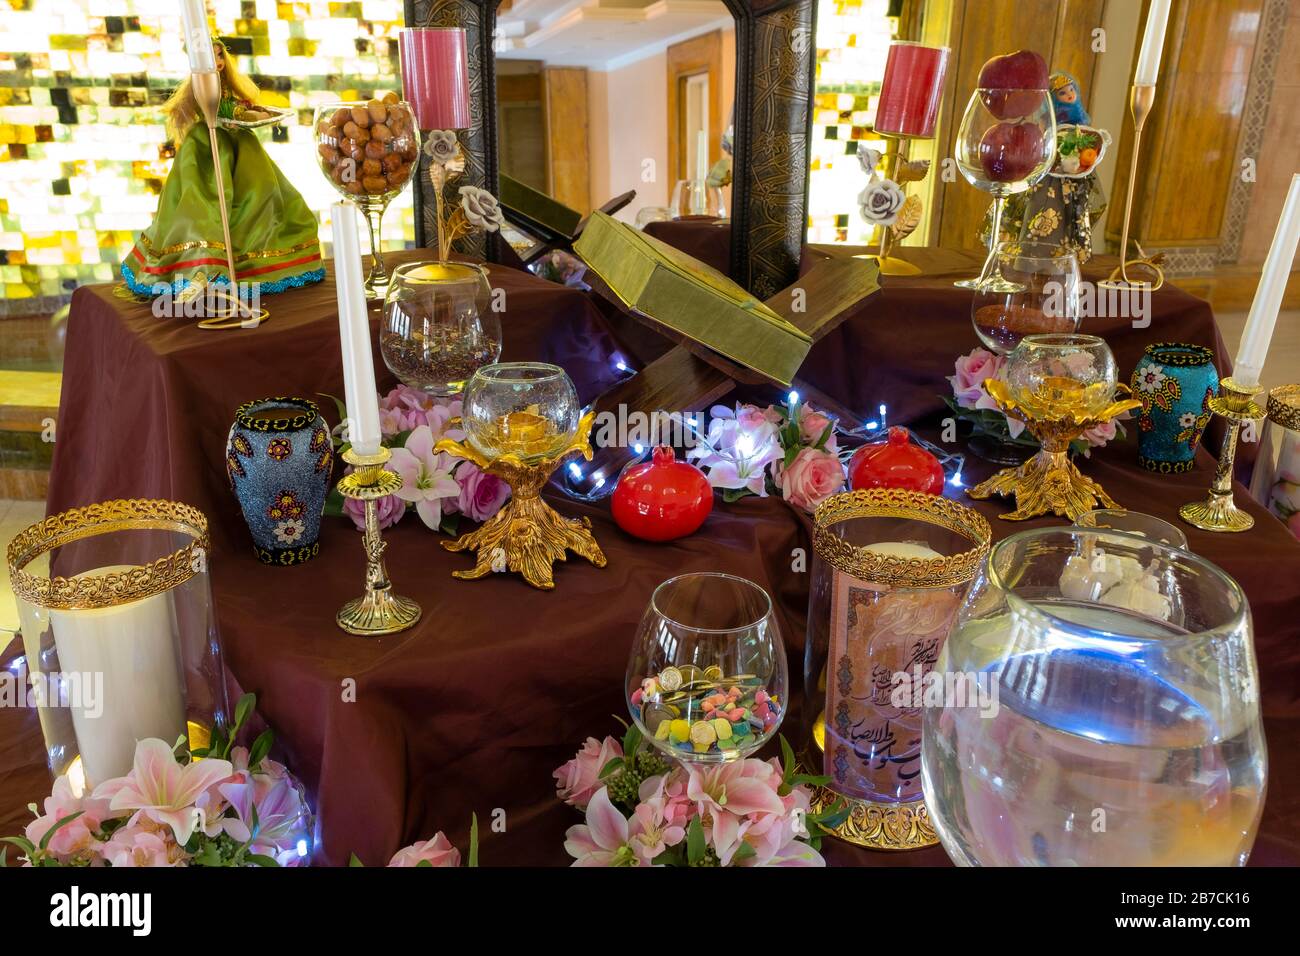 Haft sin table is the main symbol of the Persian New Year, Nowruz. Every Iranian arranges one in their home as a traditional ritual to celebrate it. Stock Photo